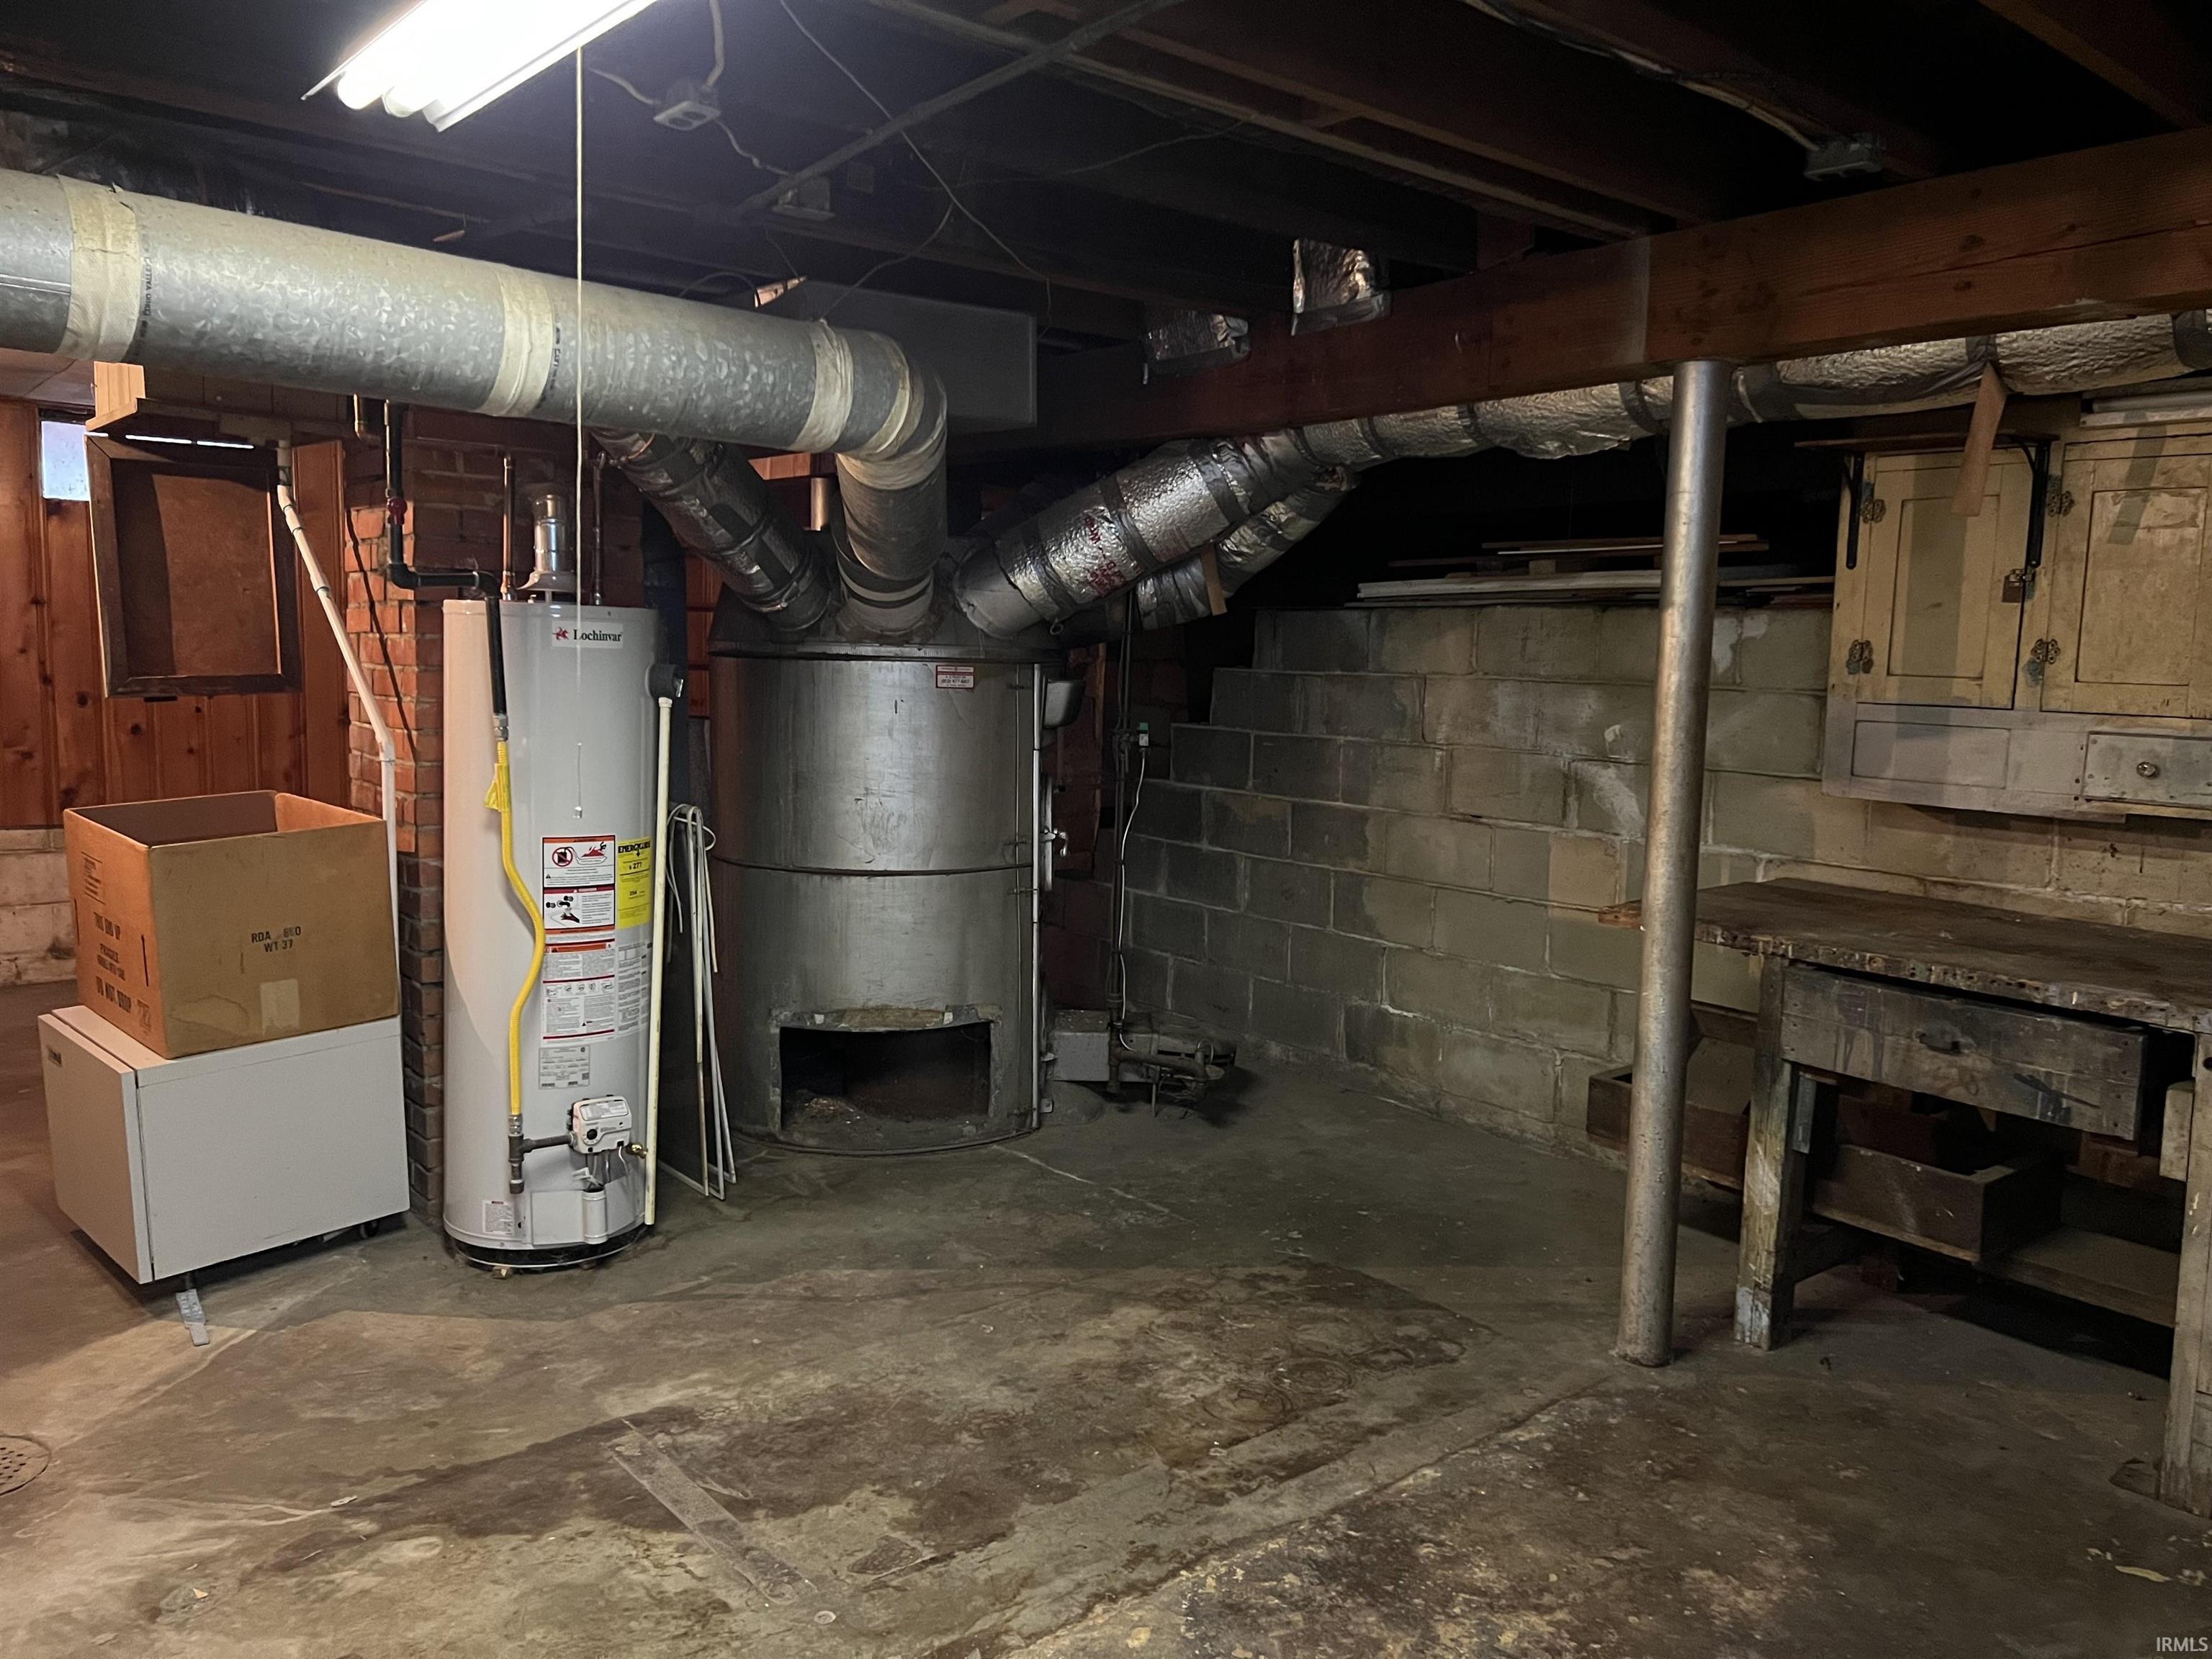 The basement furnace serves the main floor, and the upper floor has its own gas furnace and central air in the attic